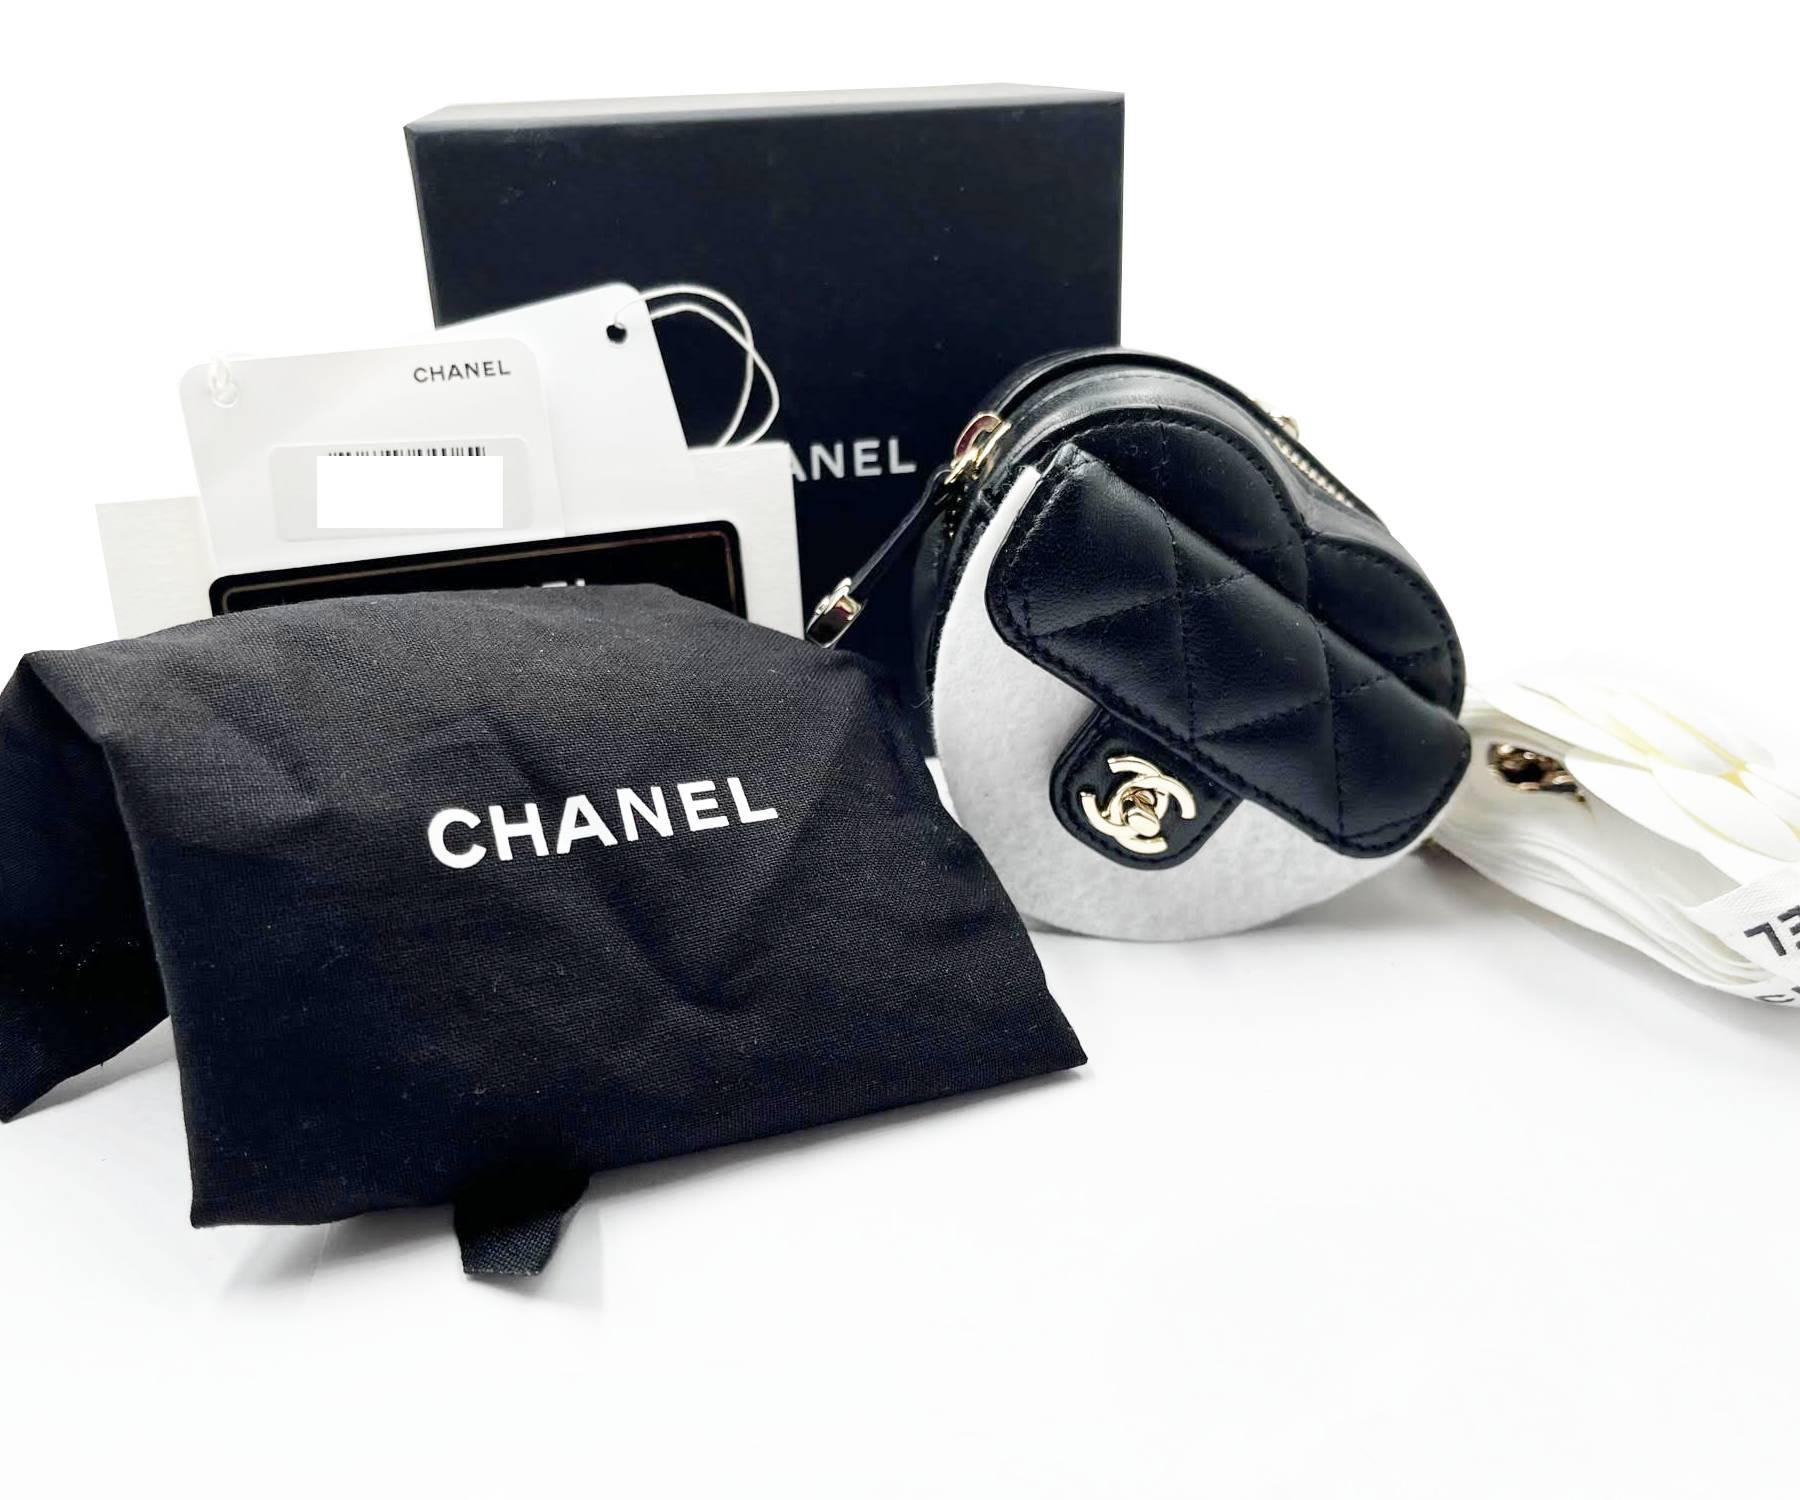 Chanel Sold Out Black Heart Pouch Necklace Wristlet Bag

* 32xxxxxx
* Made in Italy
* Comes with the tag, original box, dustbag, booklet, control number card, camellia and ribbon
* Brand New

-The heart is approximately 3.25″ x 3″ x 1.5″
-The